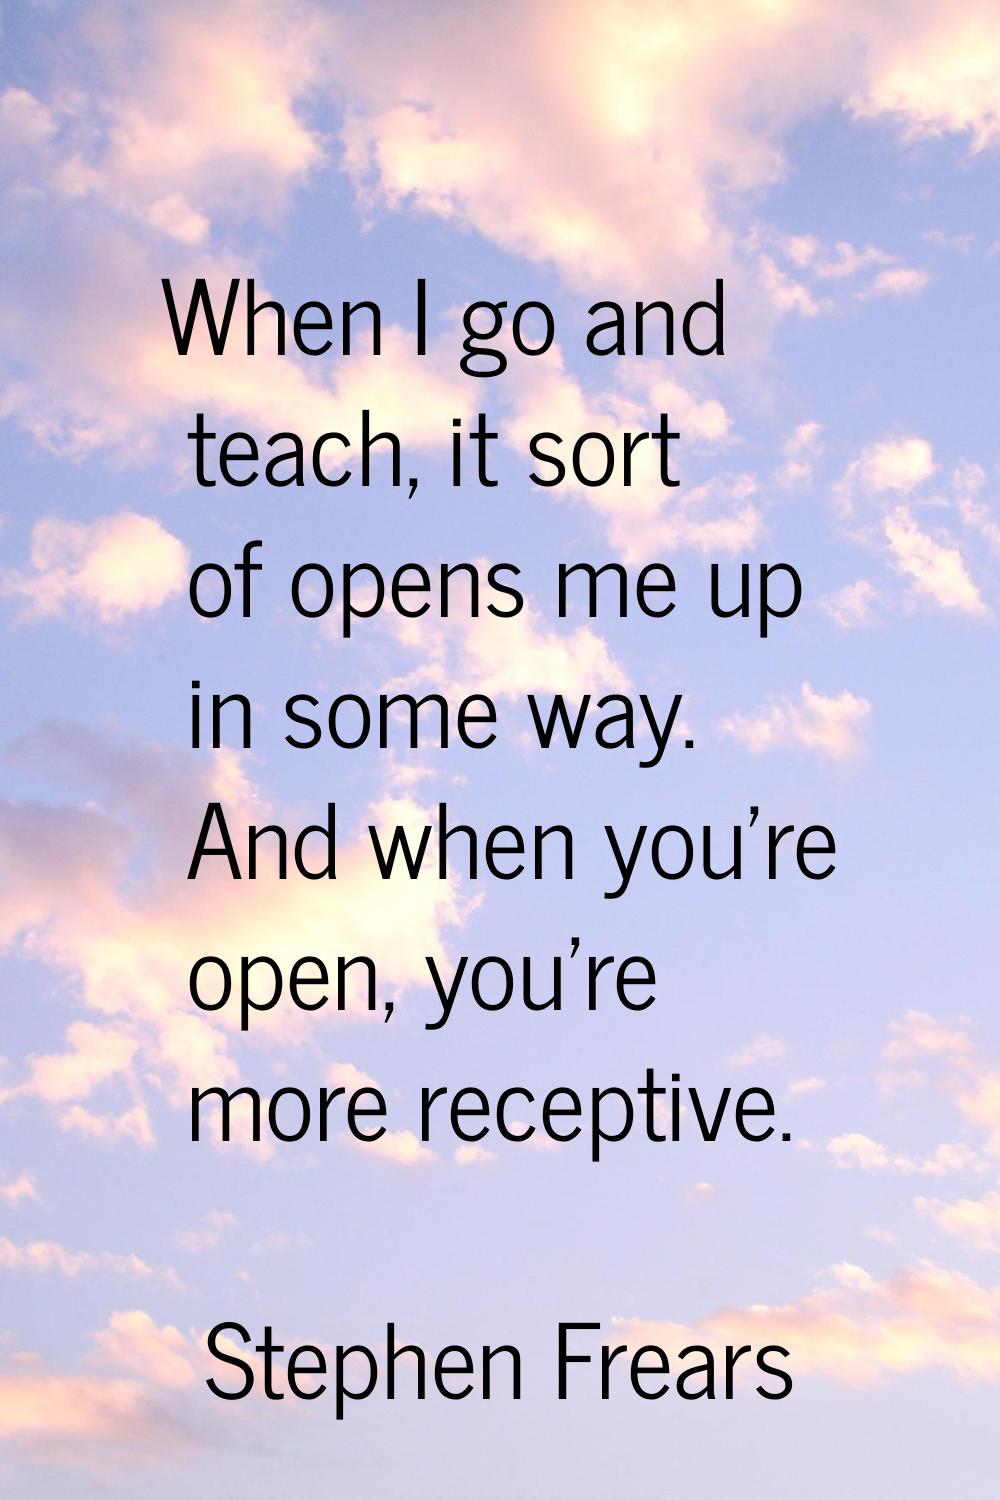 When I go and teach, it sort of opens me up in some way. And when you're open, you're more receptiv